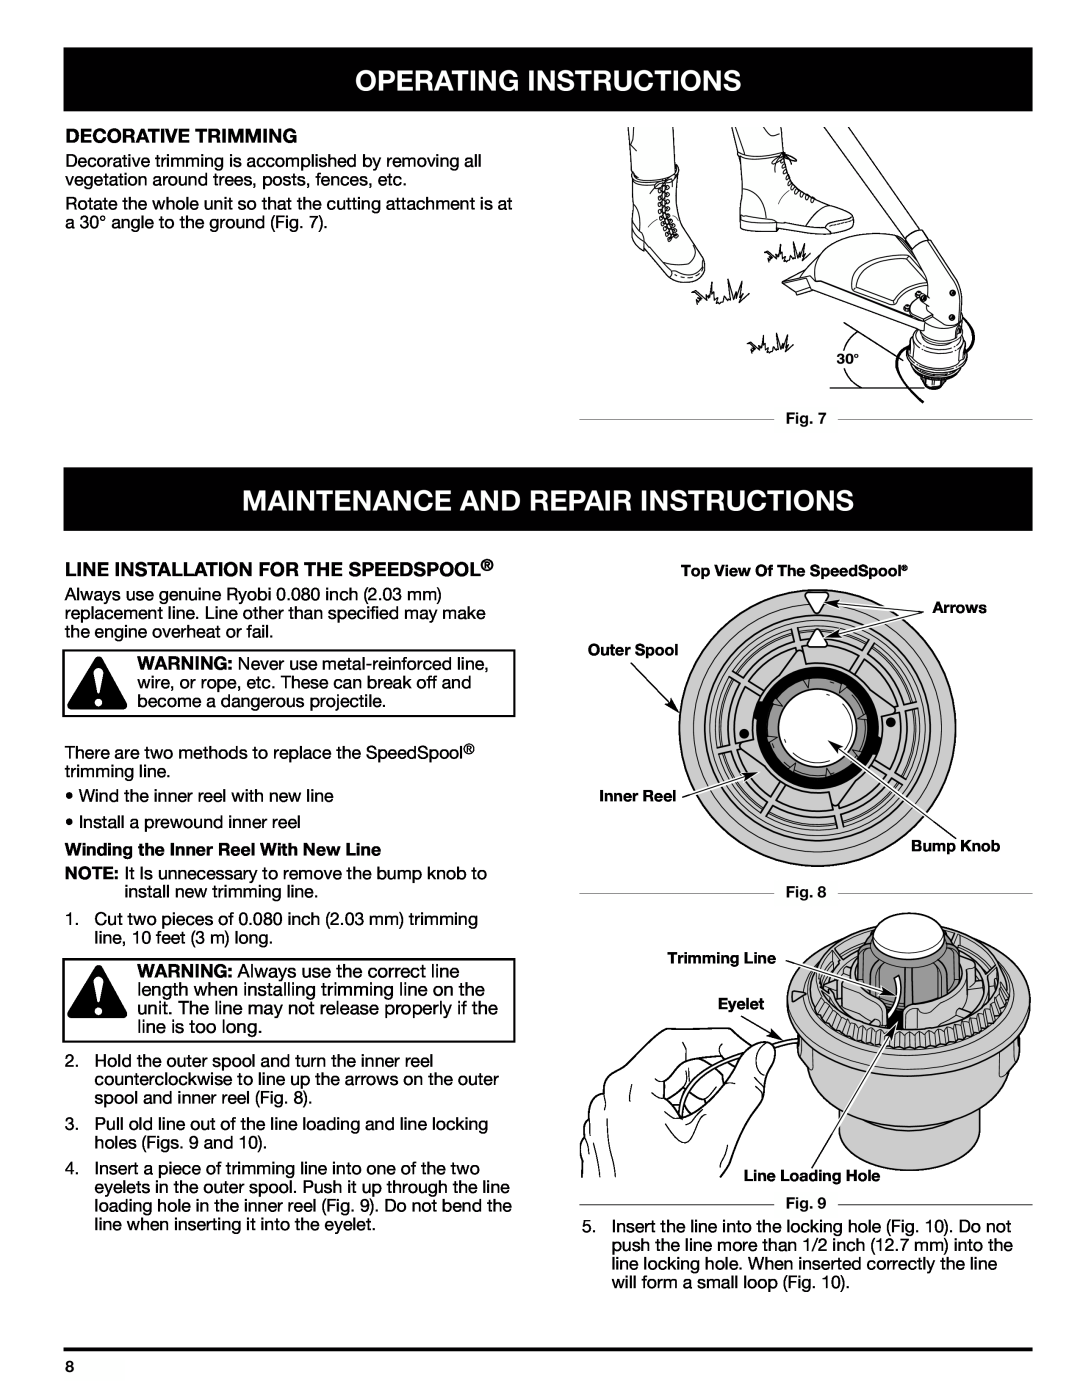 Ryobi SS725r manual Maintenance And Repair Instructions, Decorative Trimming, Line Installation For The Speedspool 